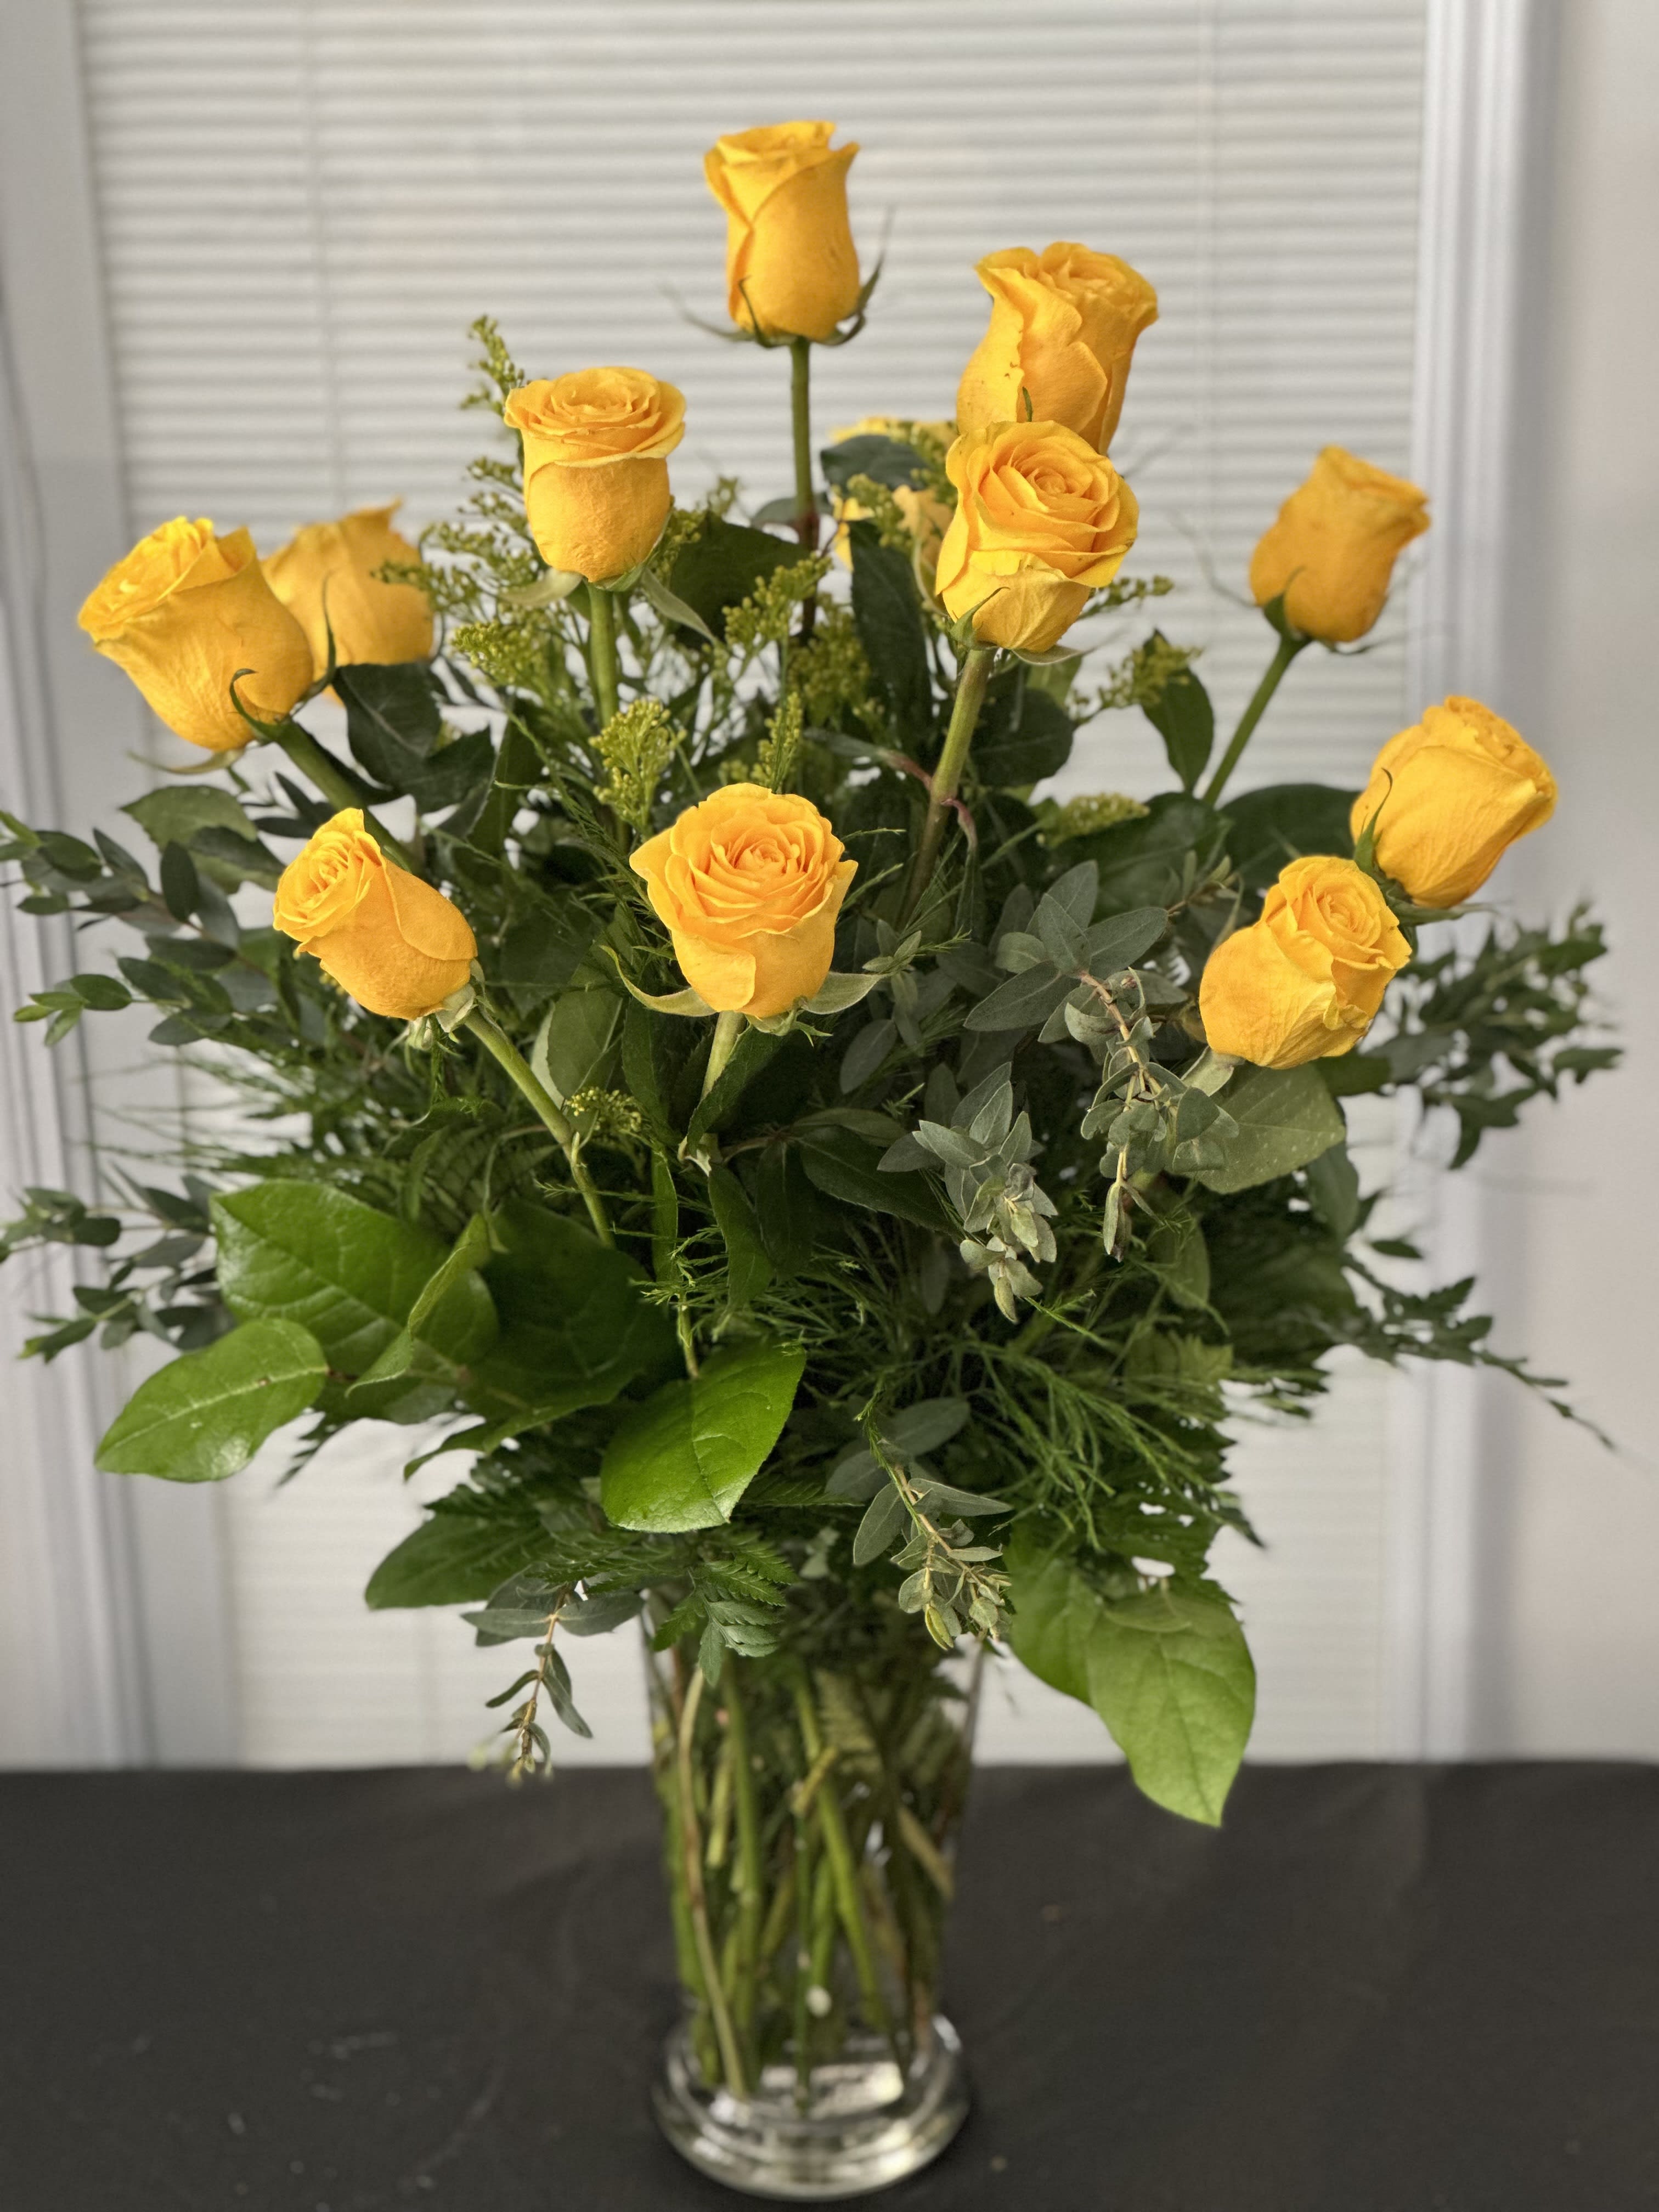 Rosy Glow Bouquet - Yellow roses symbolize friendship and sending this sunny bouquet of bright yellow flowers is such a beautiful way to celebrate a special bond. Destined to make anyone's day glow these roses are brilliant!